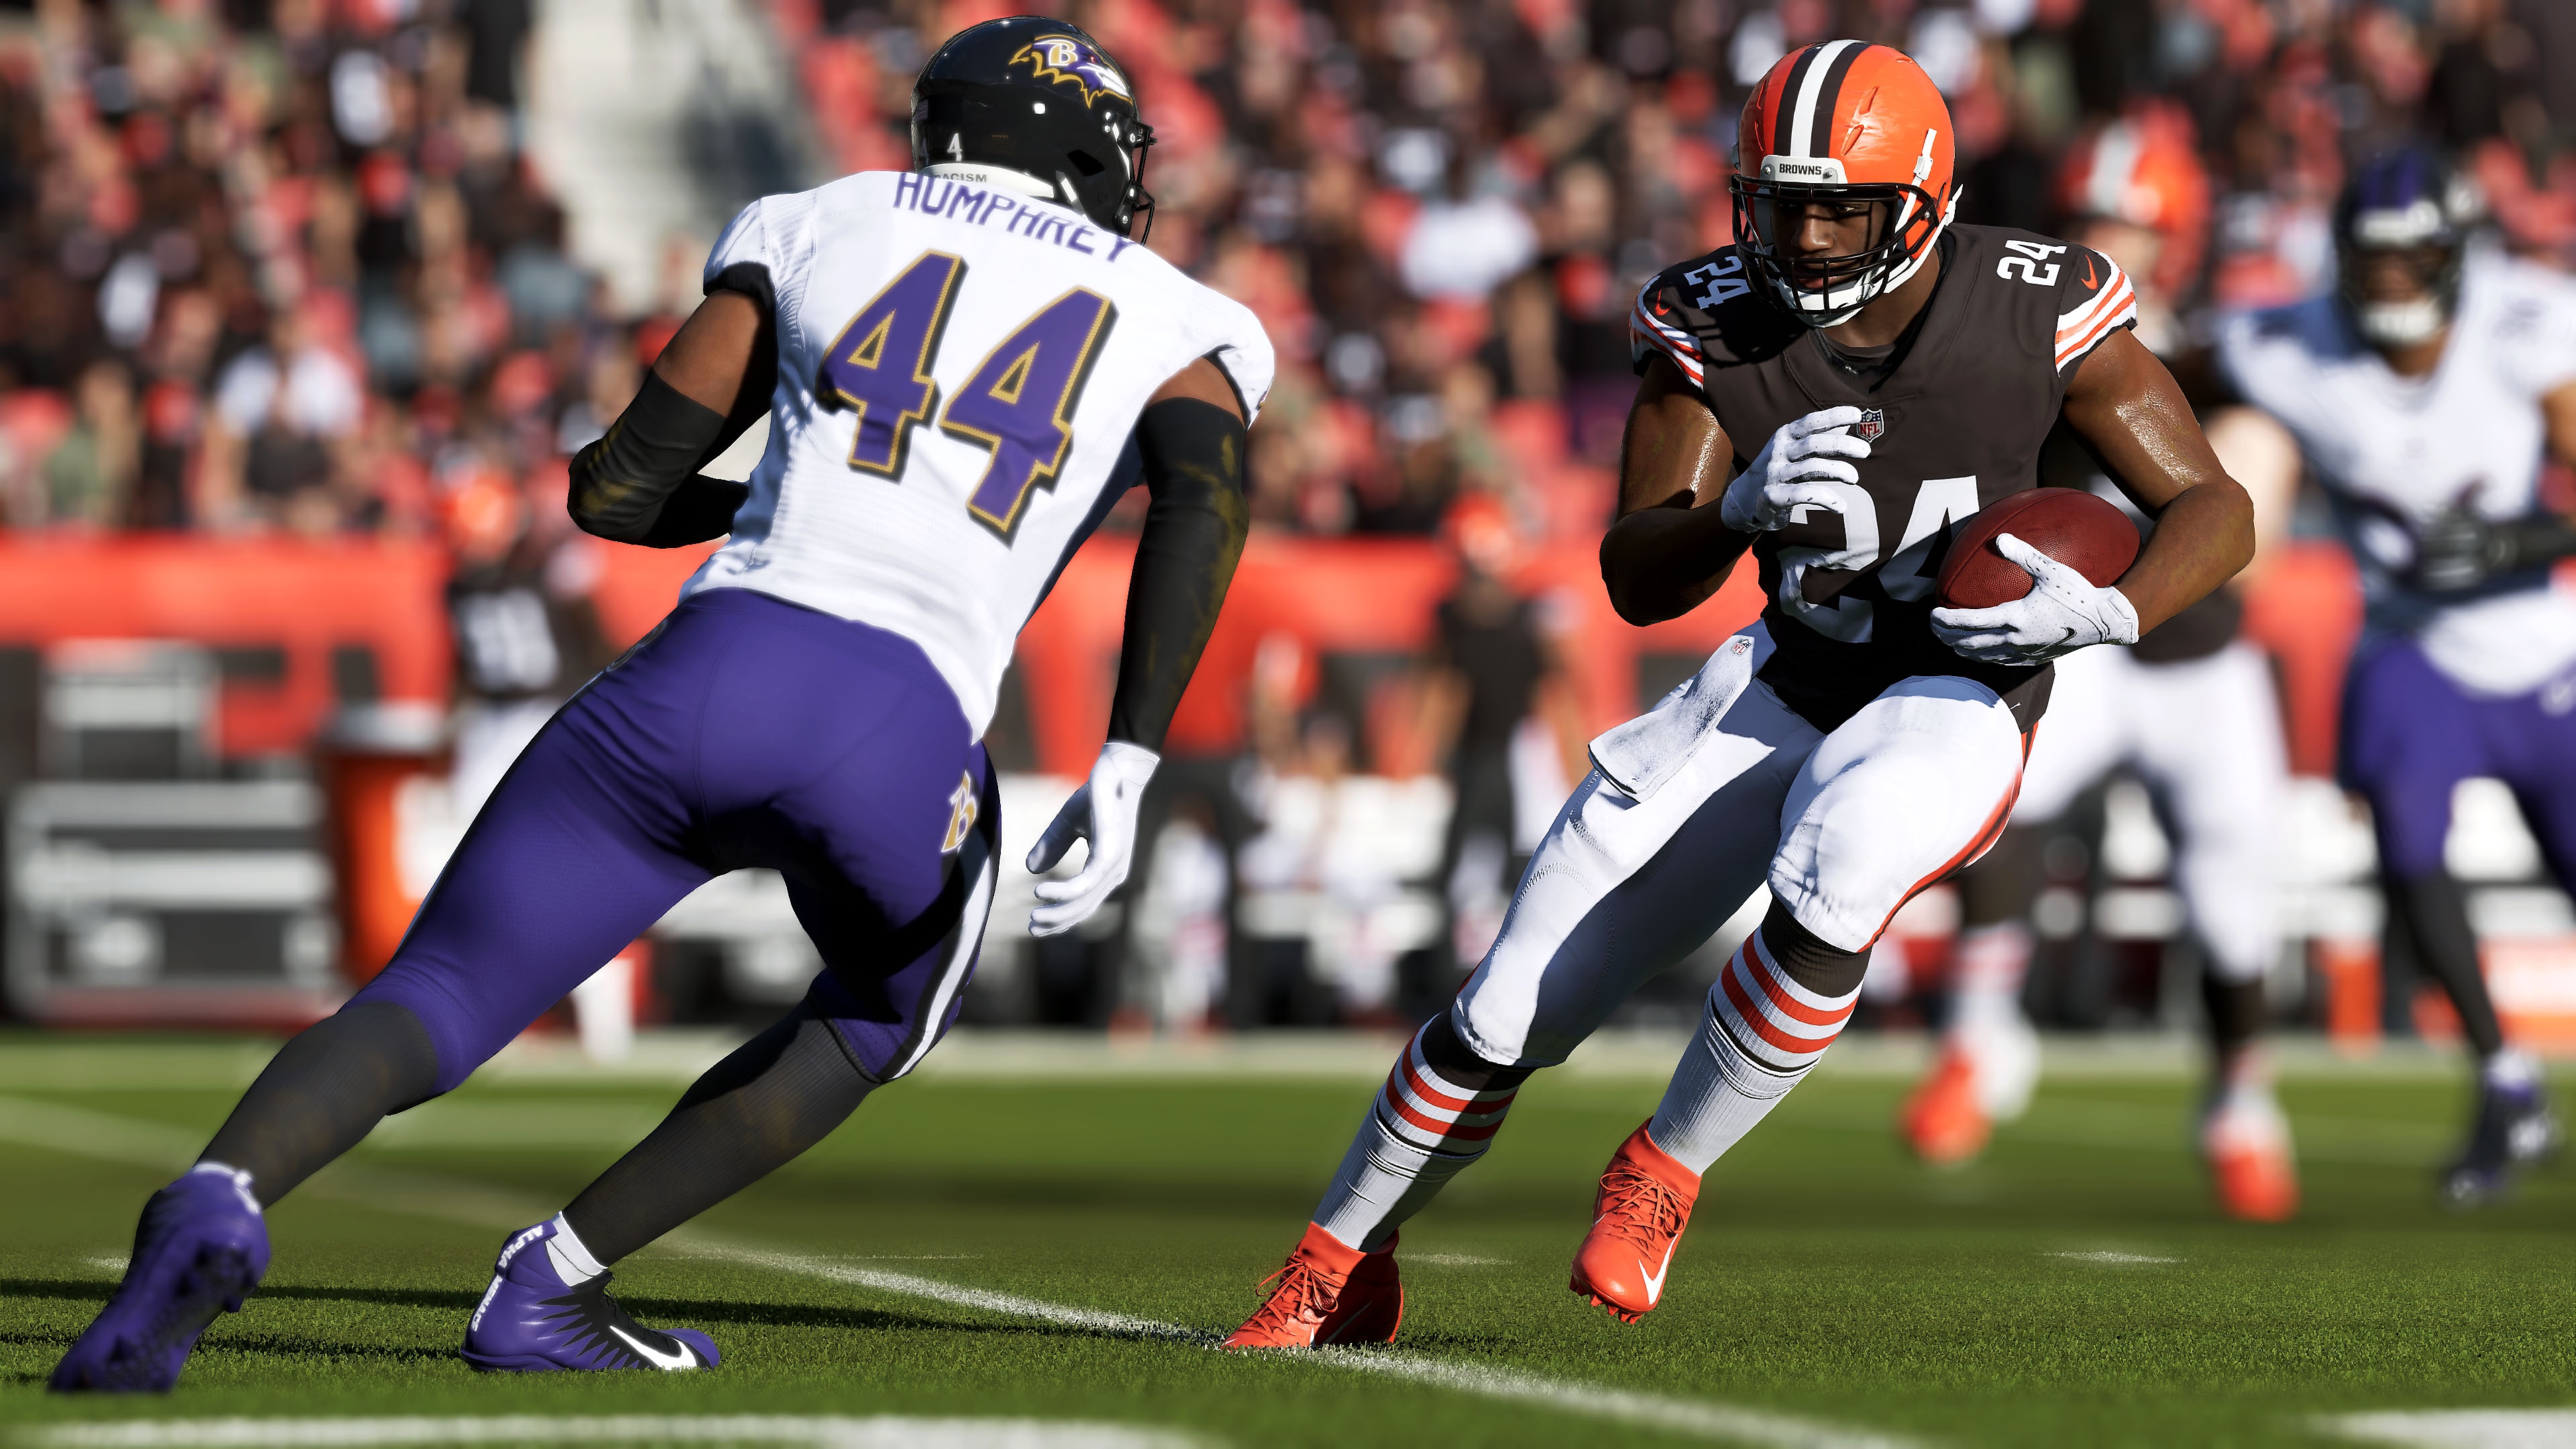 Madden NFL 23 hit everything key features image of player getting tackled